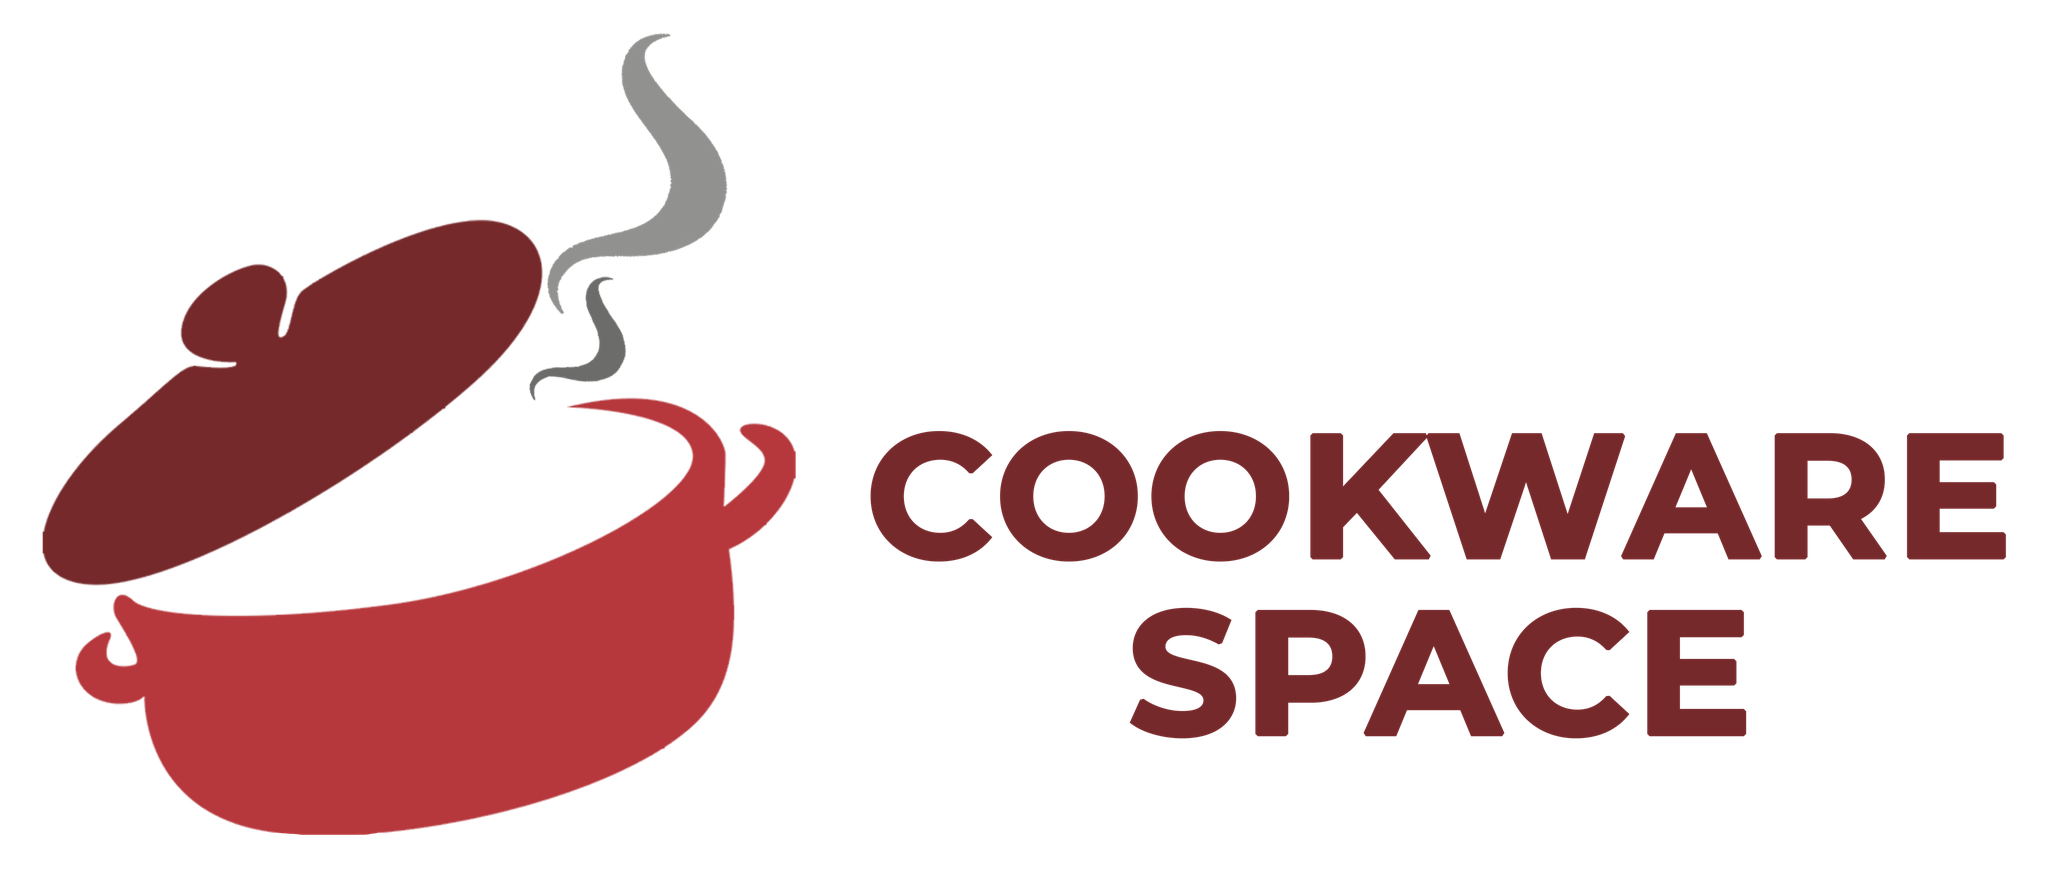 Cookware Space